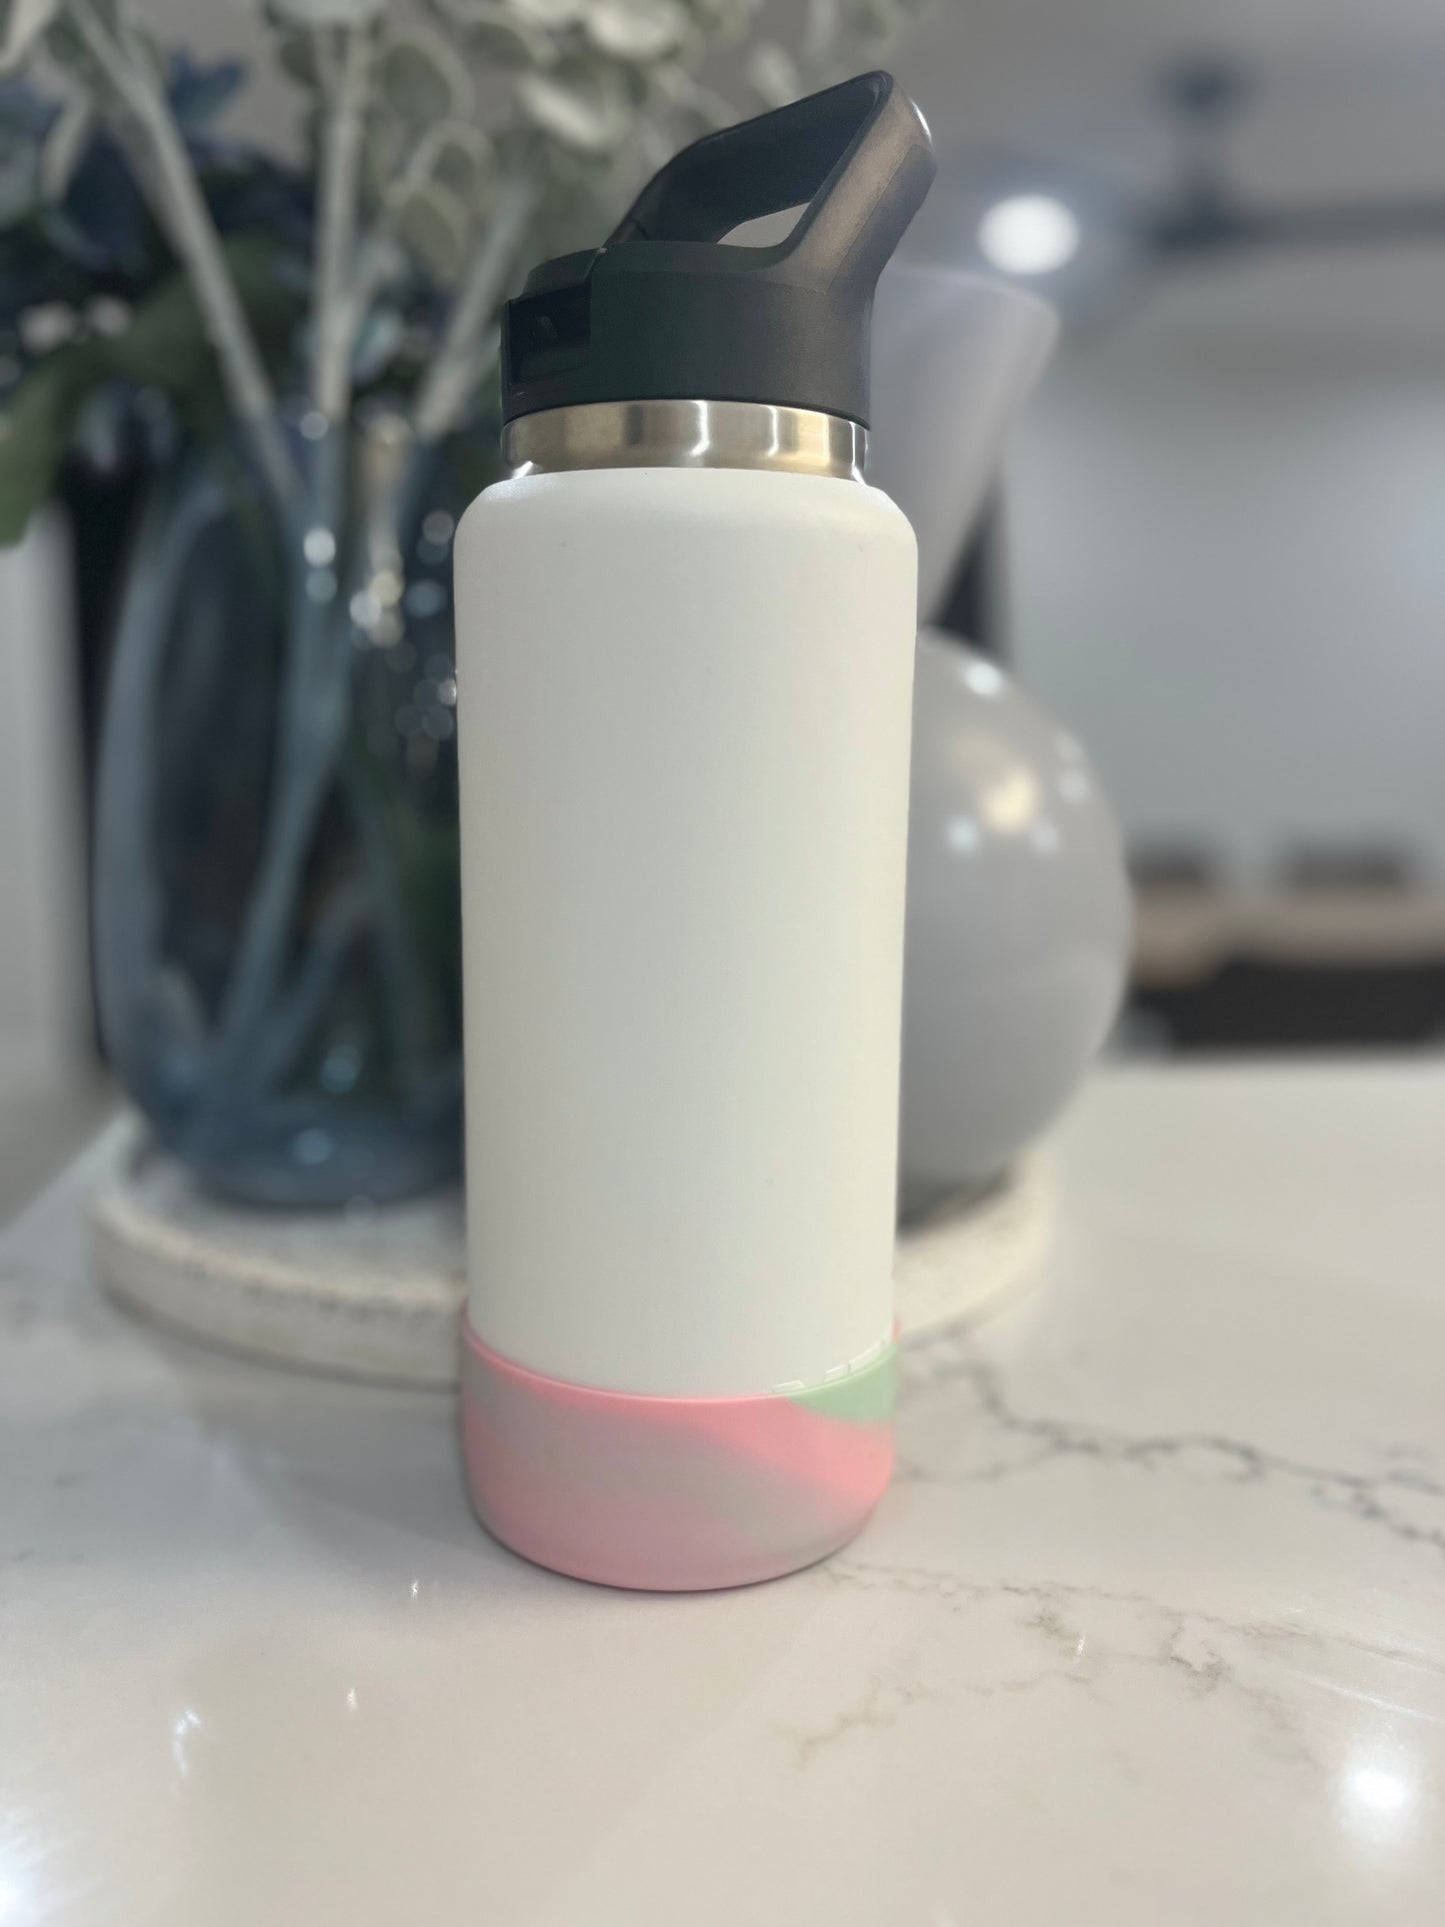 Silicone Bottle Guard